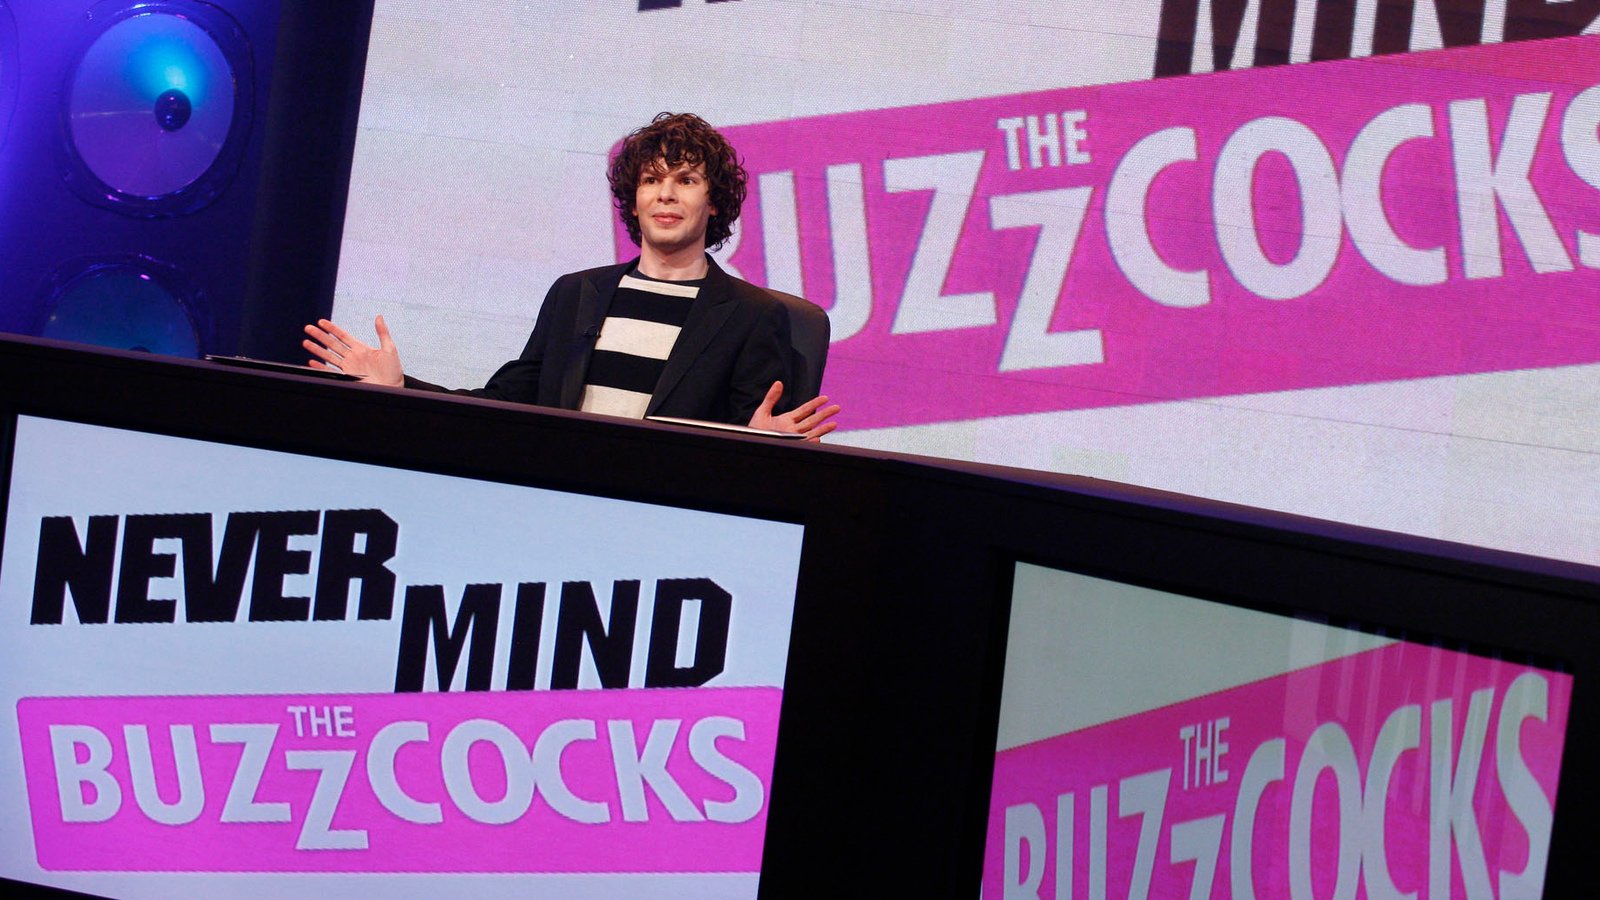 Simon Amstell Never Mind The Buzzcocks